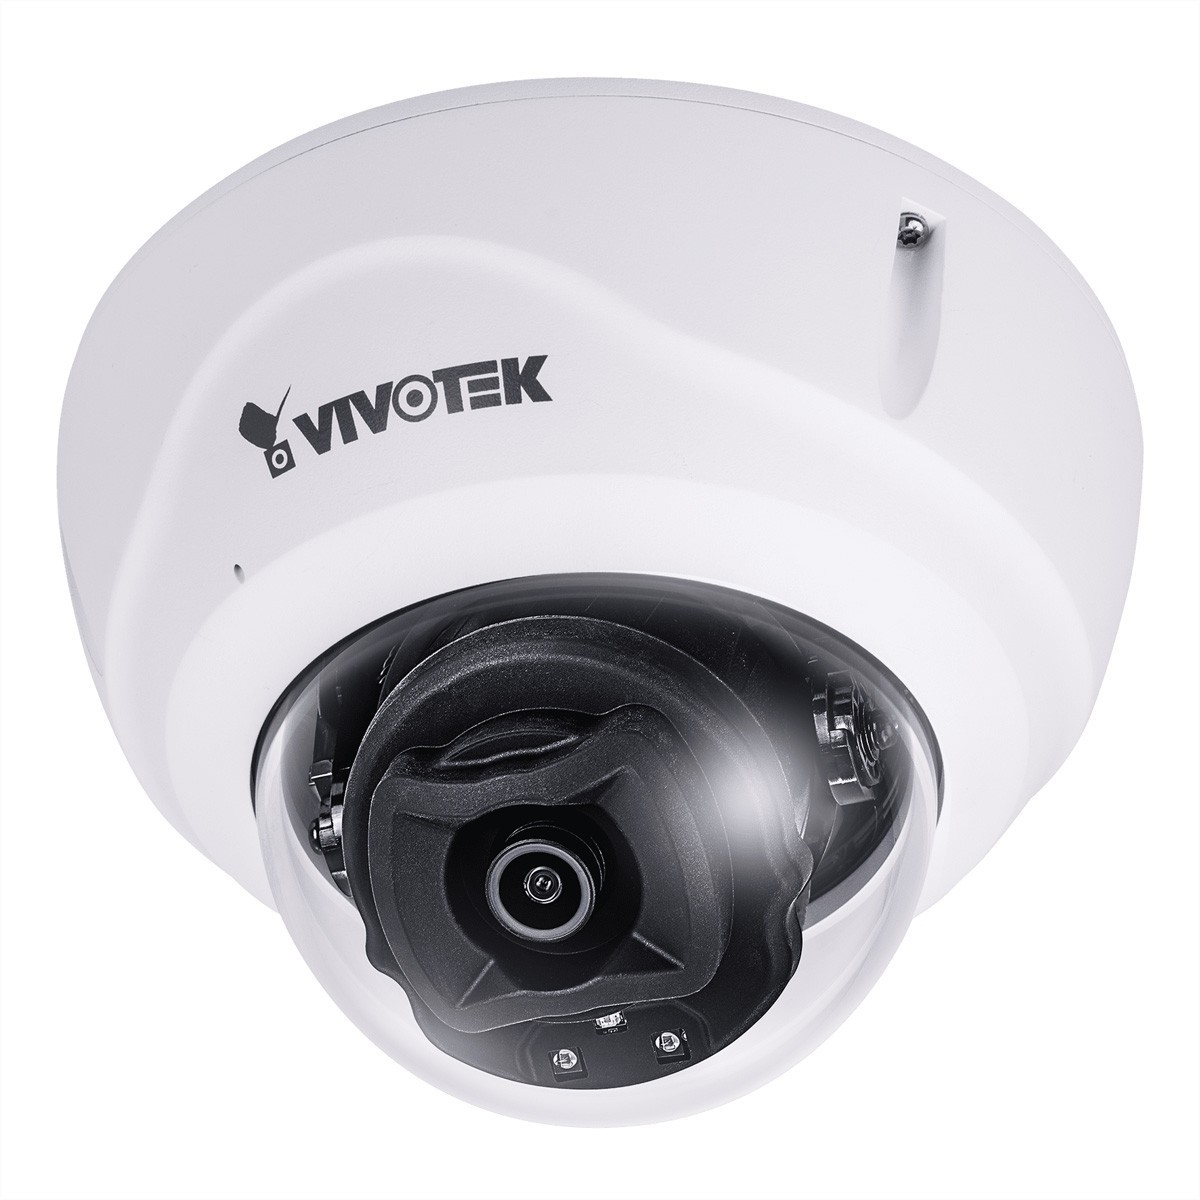 VIVOTEK FD9388-HTV - IP security camera - Indoor & outdoor - Wired - Dome - Ceiling - White